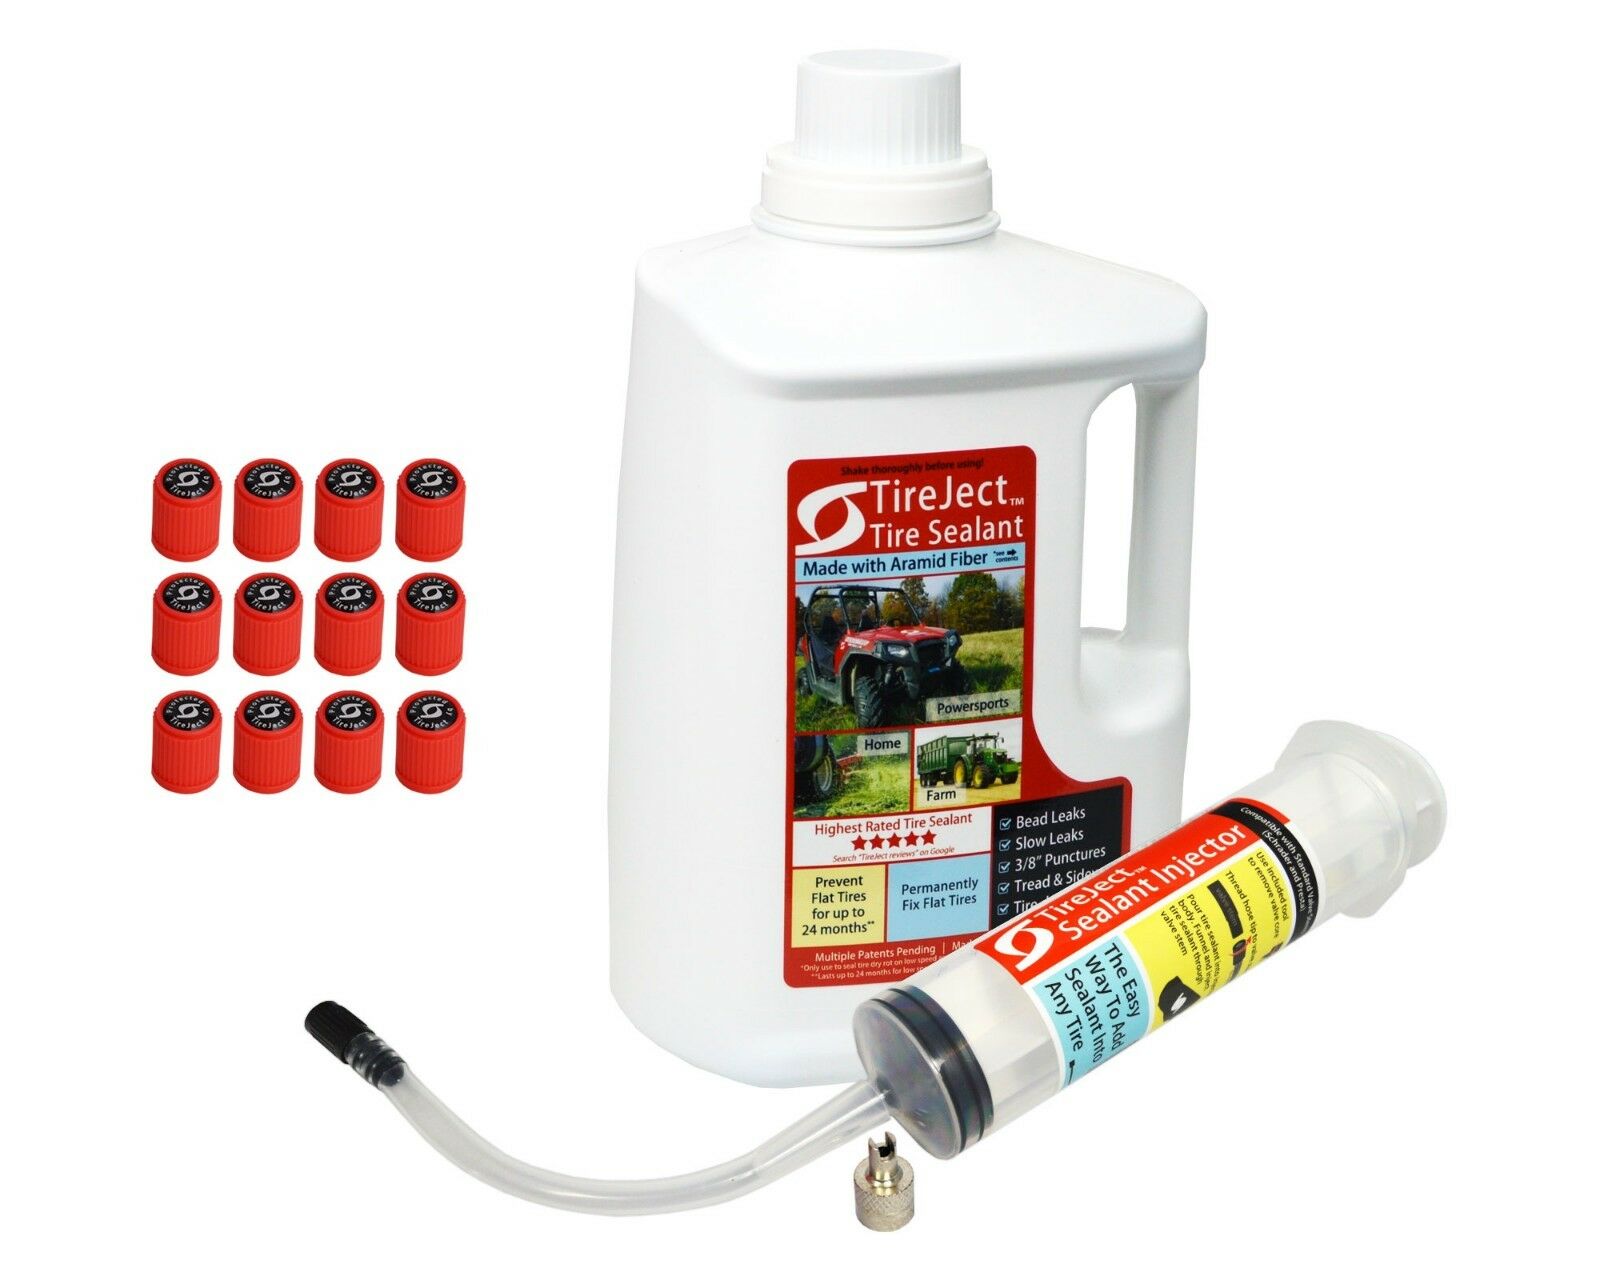 Tireject Off-road Tire Sealant Gallon Kit Value Size For Punctures & Bead Leaks